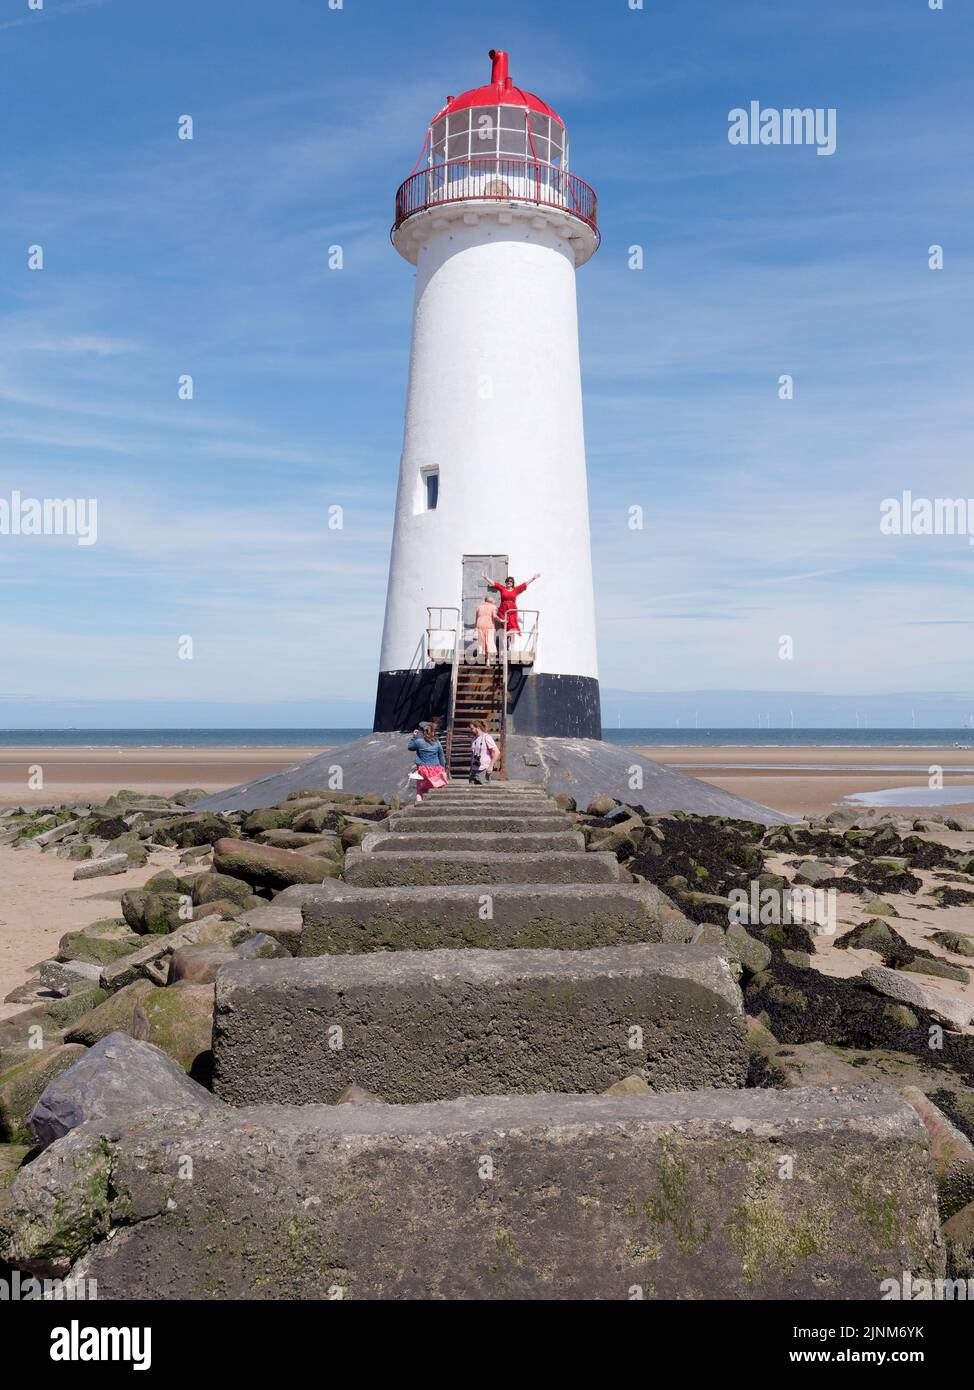 Talacre, Flintshire, Wales, Aug 07 2022: Point of Ayr Lighthouse aka Talacre Lighthouse, a Grade II listed building situated on the beach. Lady in red Stock Photo